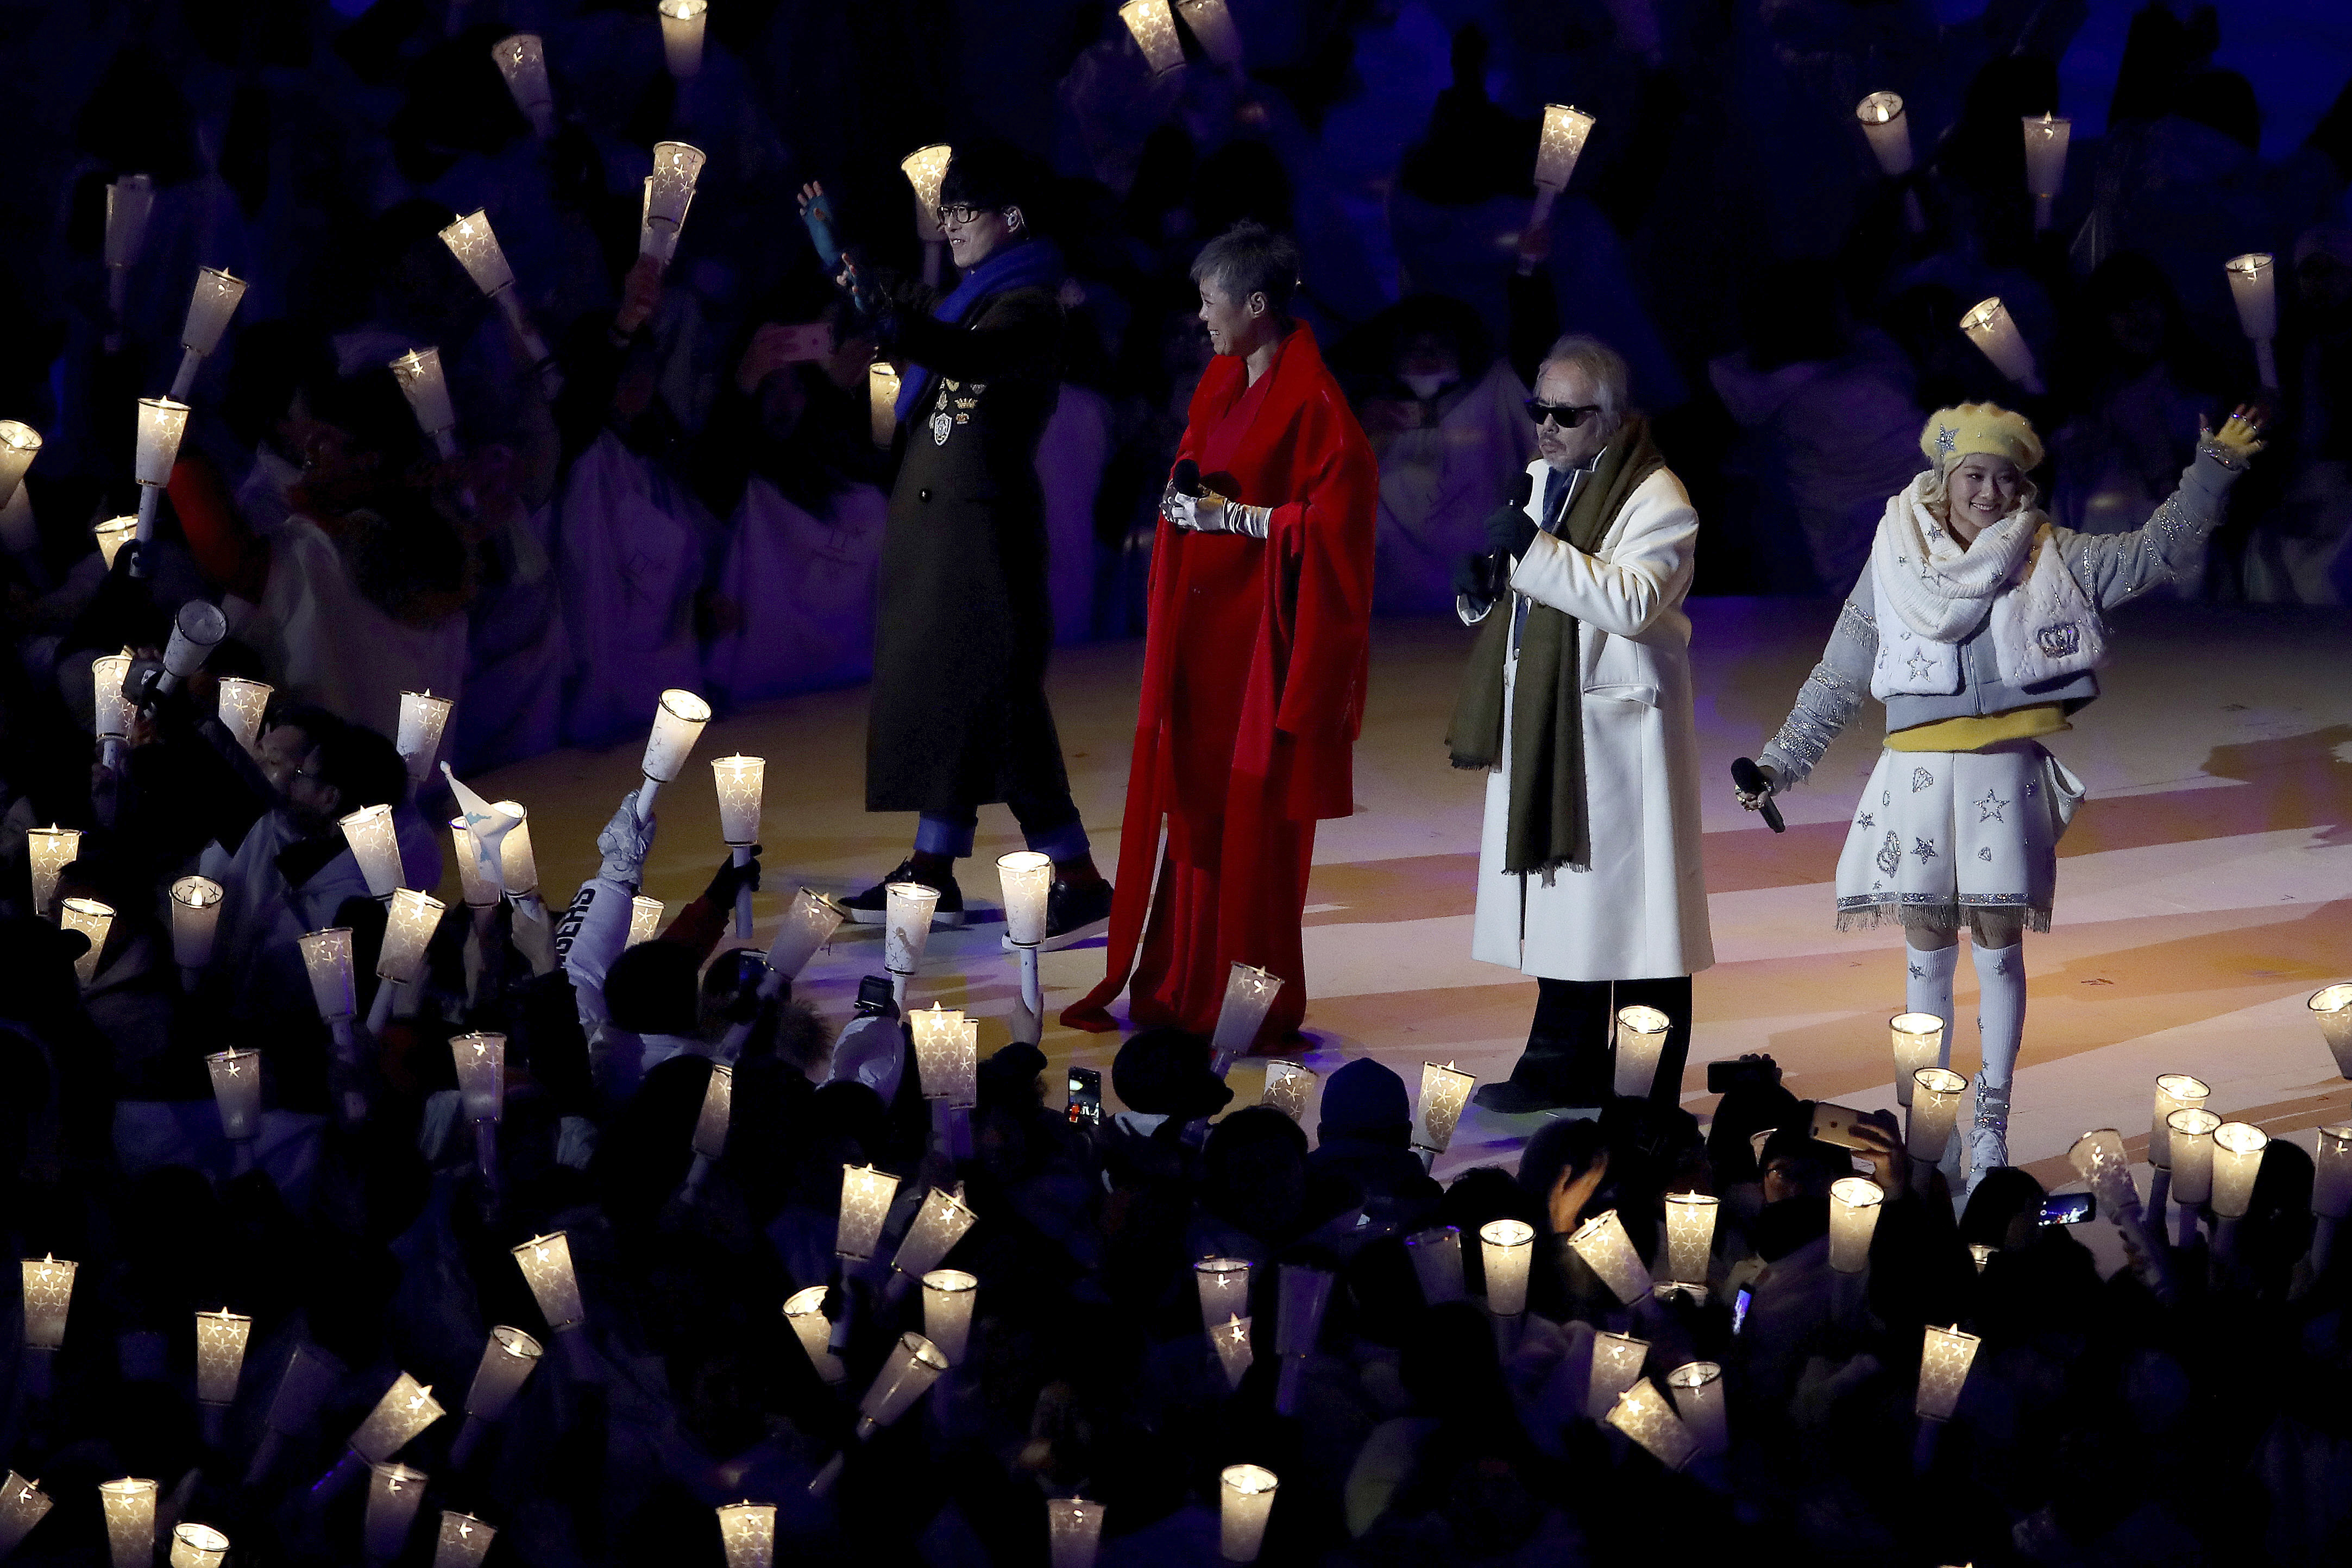 Singers perform at the opening ceremony of the 2018 Winter Olympics in Pyeongchang